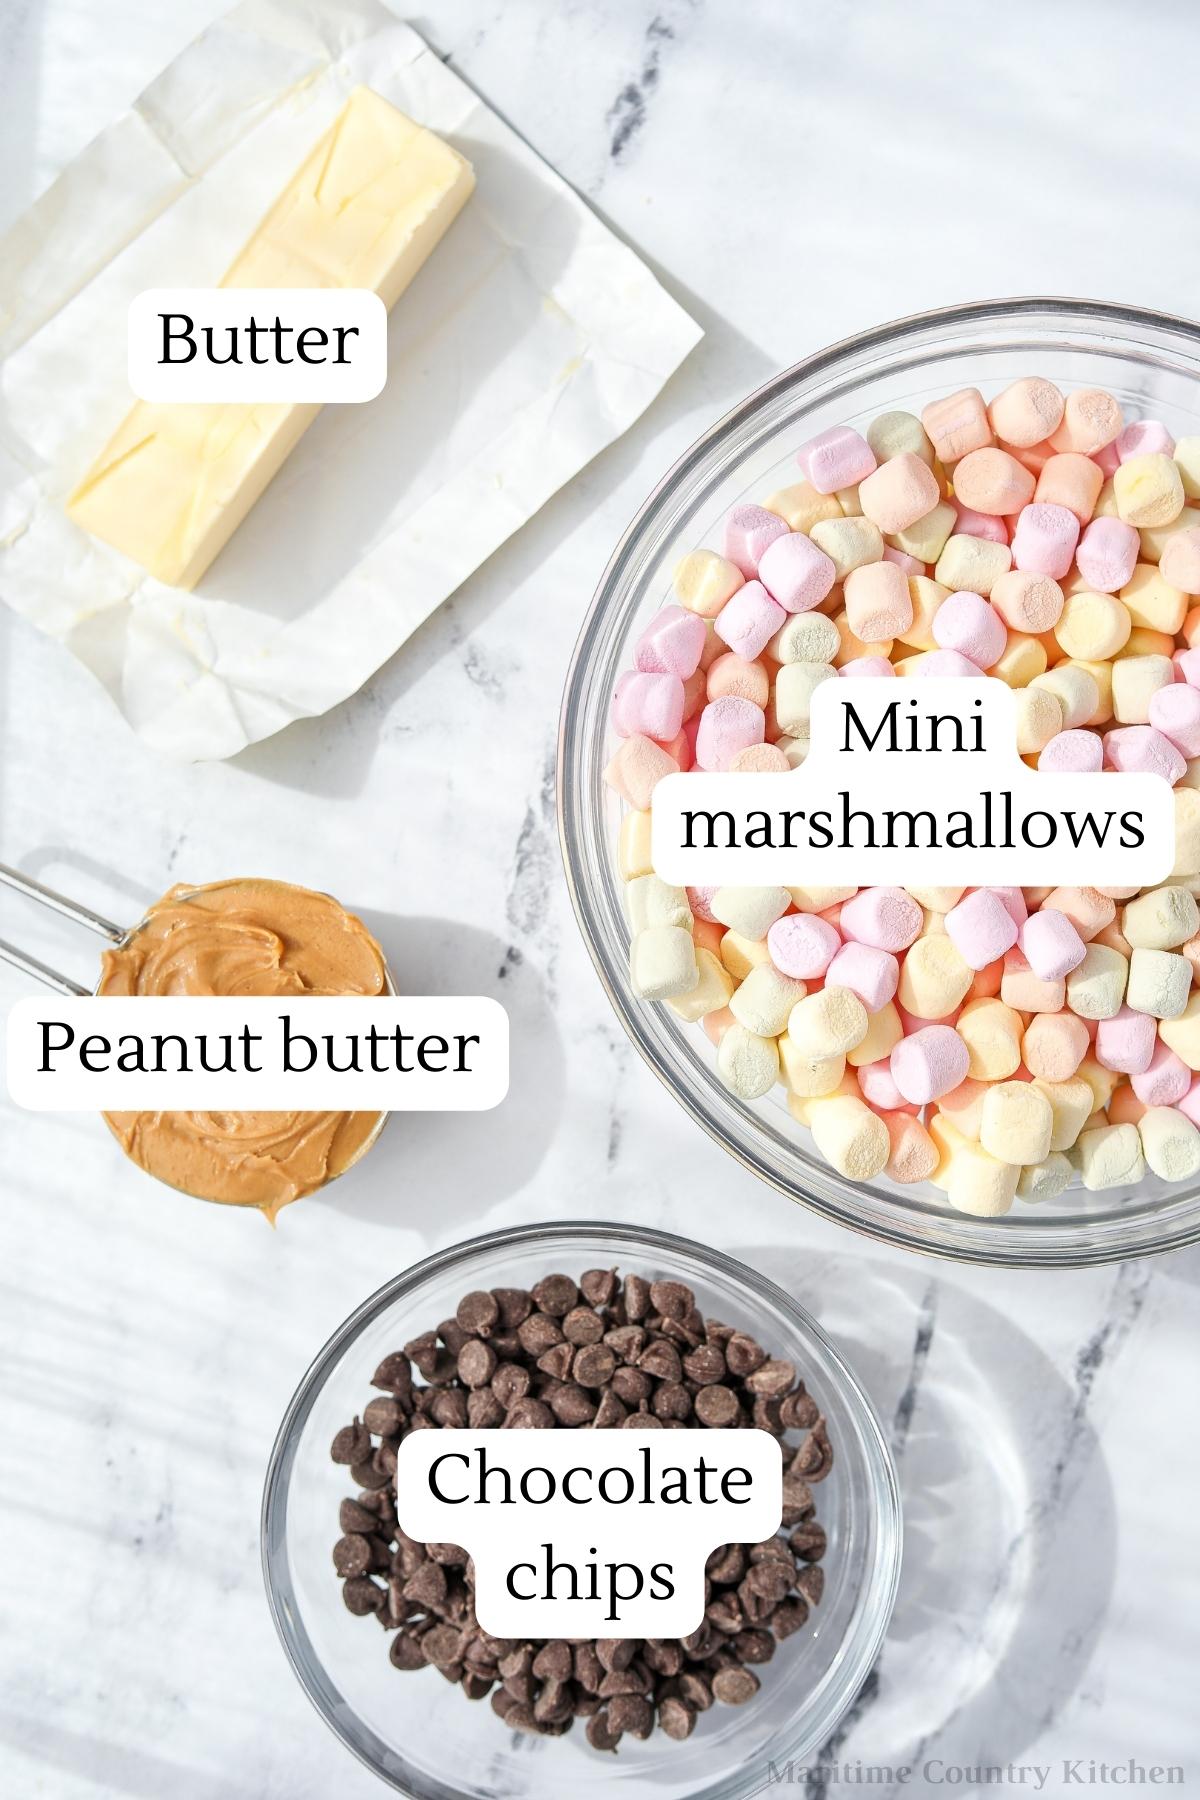 The ingredients needed to make confetti bars: butter, marshmallows, peanut butter, and chocolate chips.